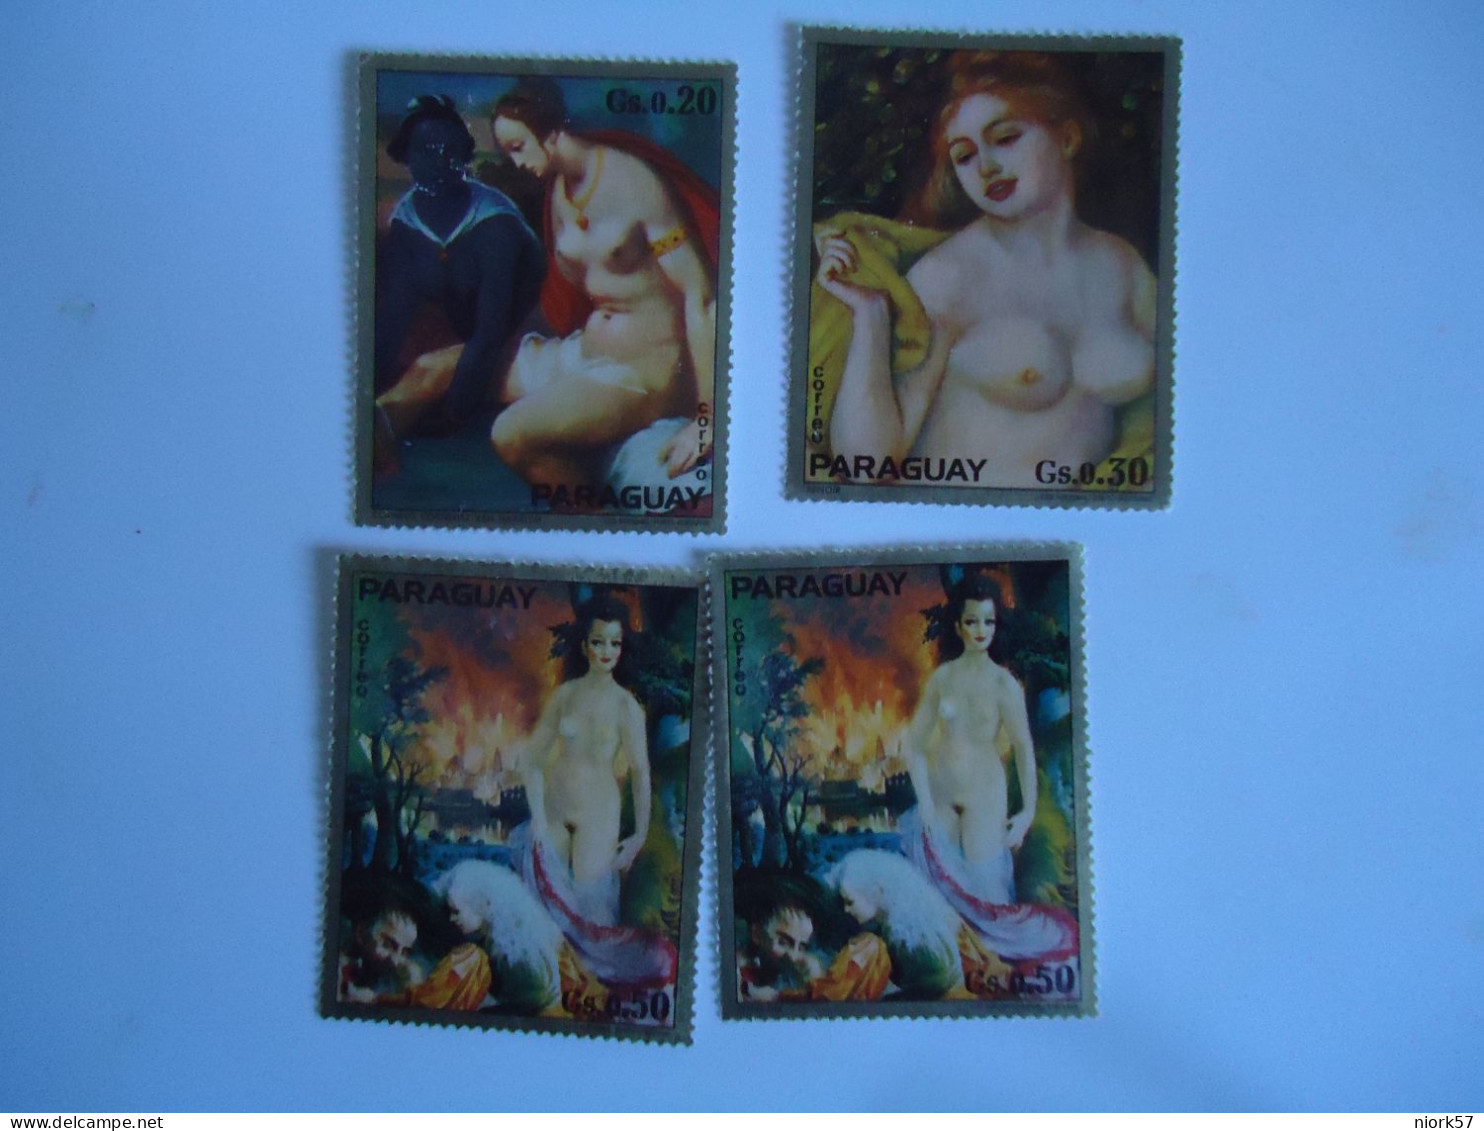 PARAGUAY  MNH 3 MLN 1 4 STAMPS  PAINTINGS NUDES - Desnudos